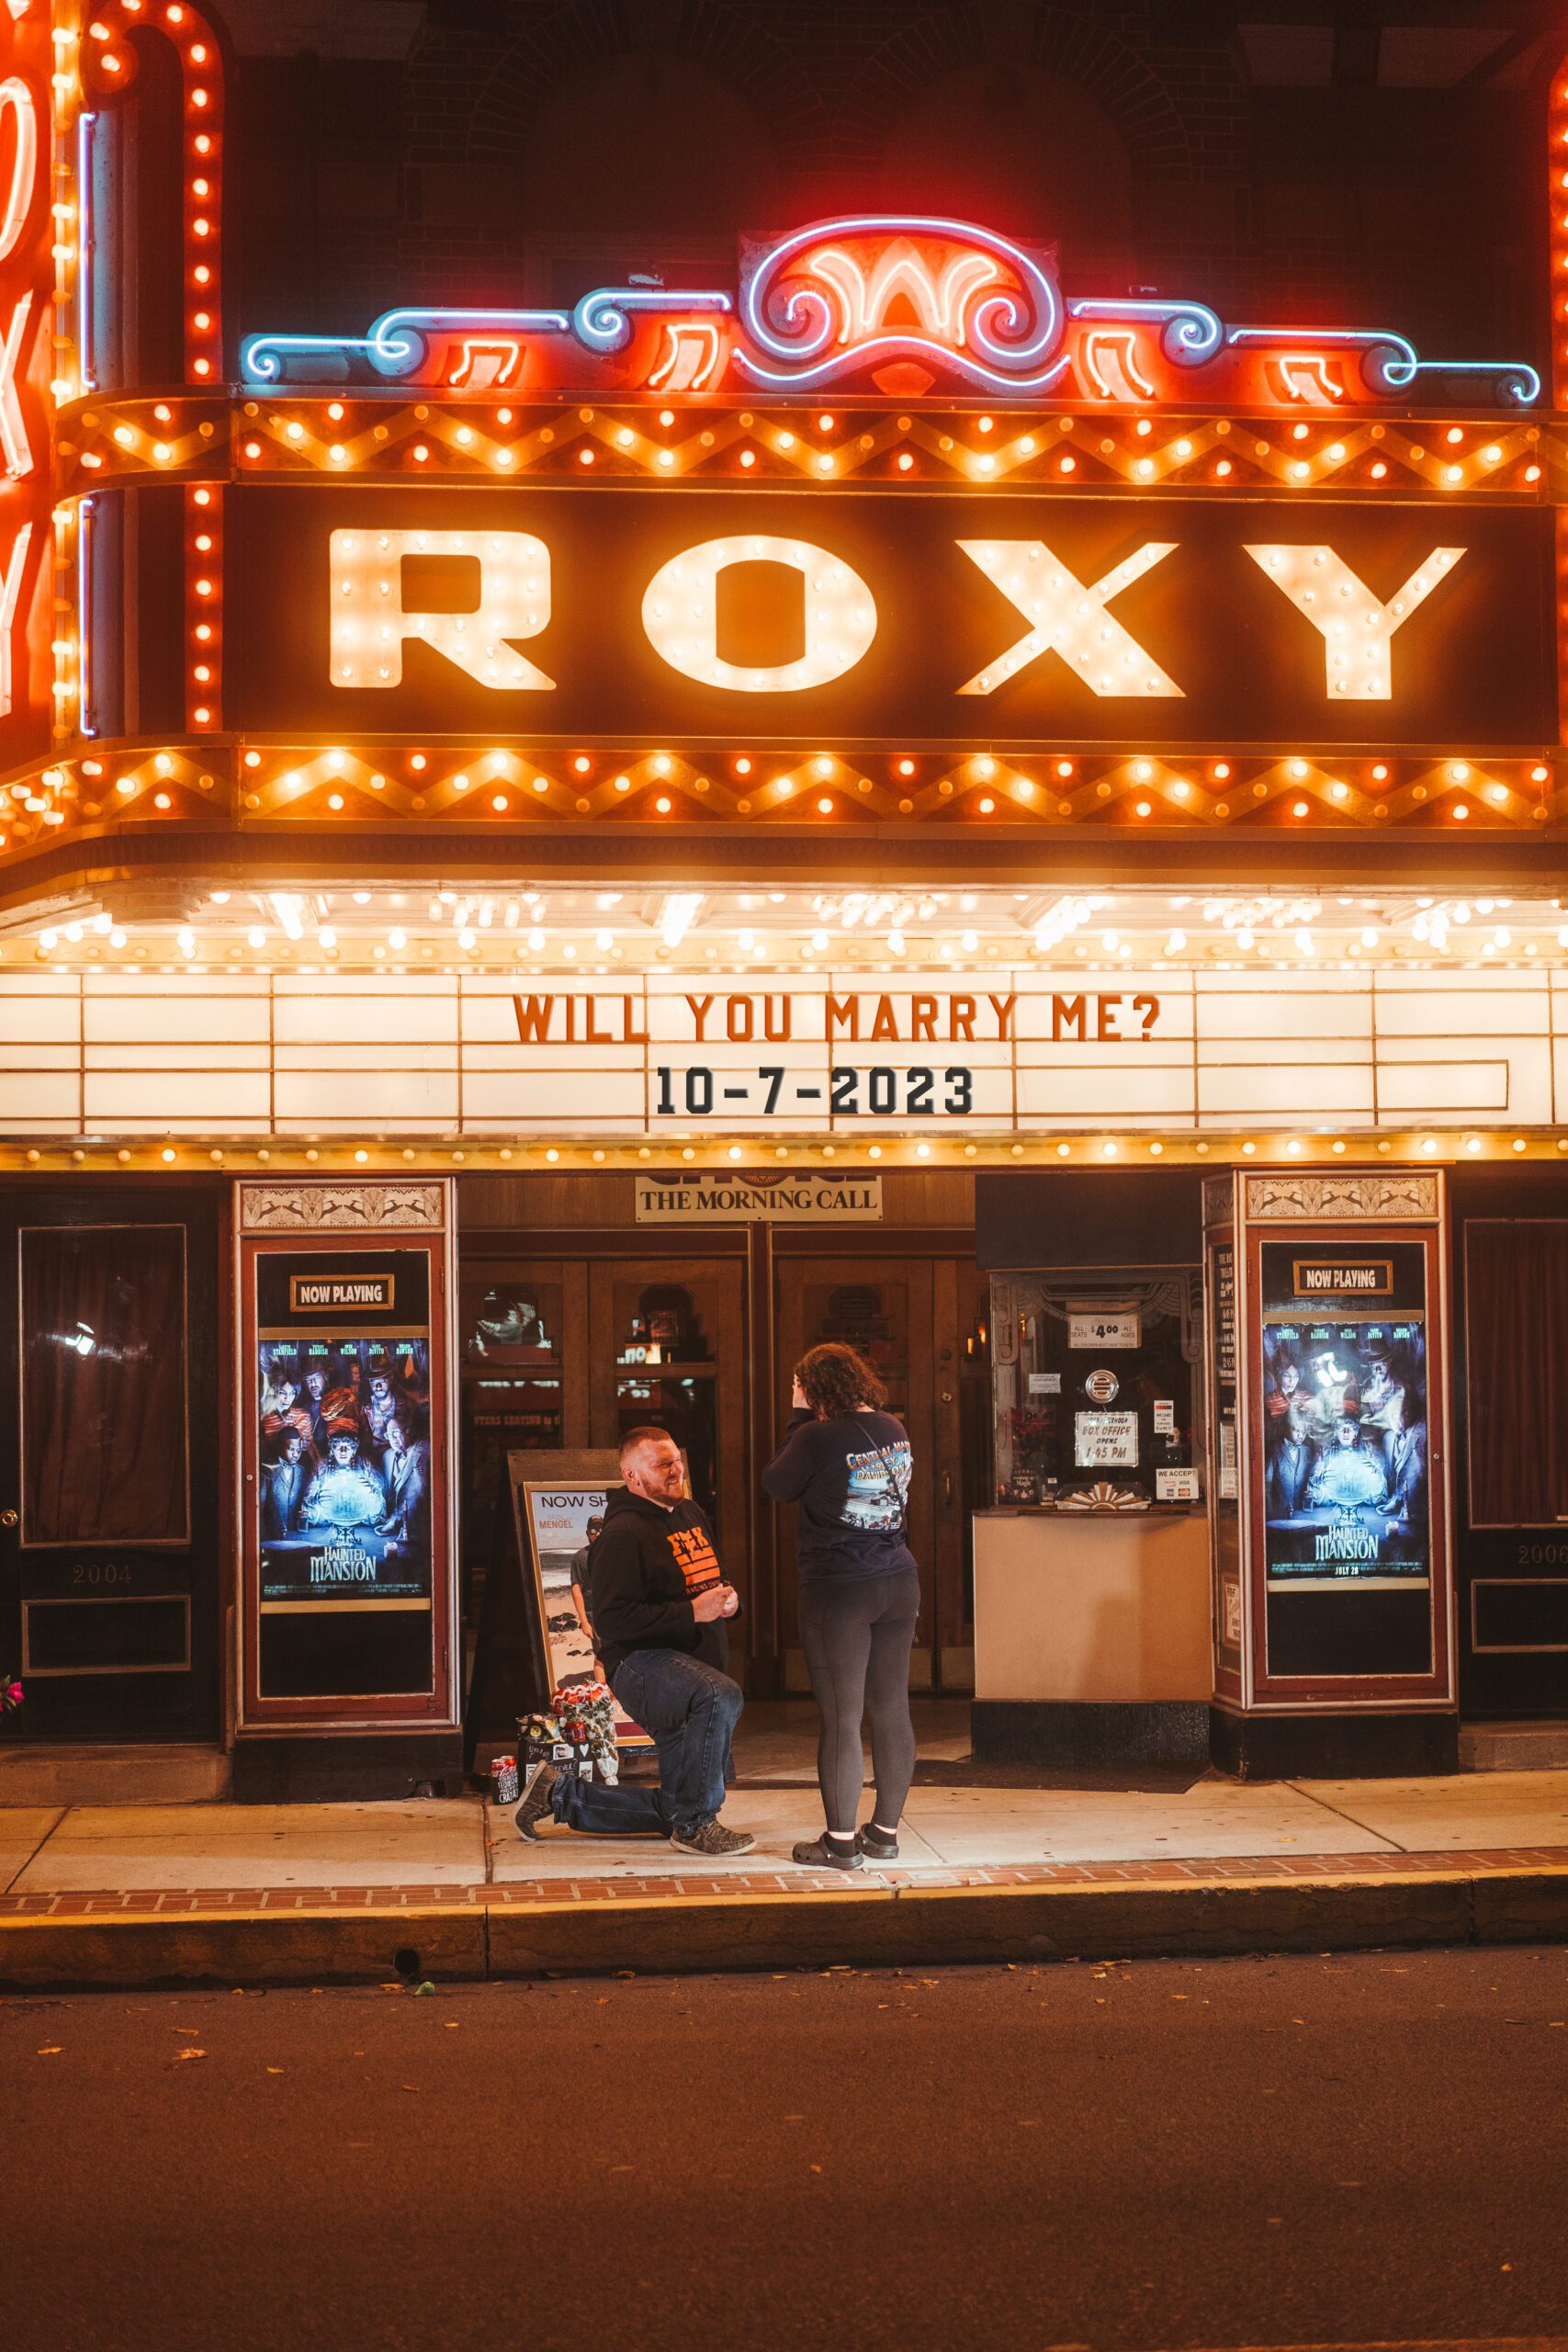 a couple got engaged in the lehigh valley, PA at the Roxy Theater and had a private showing